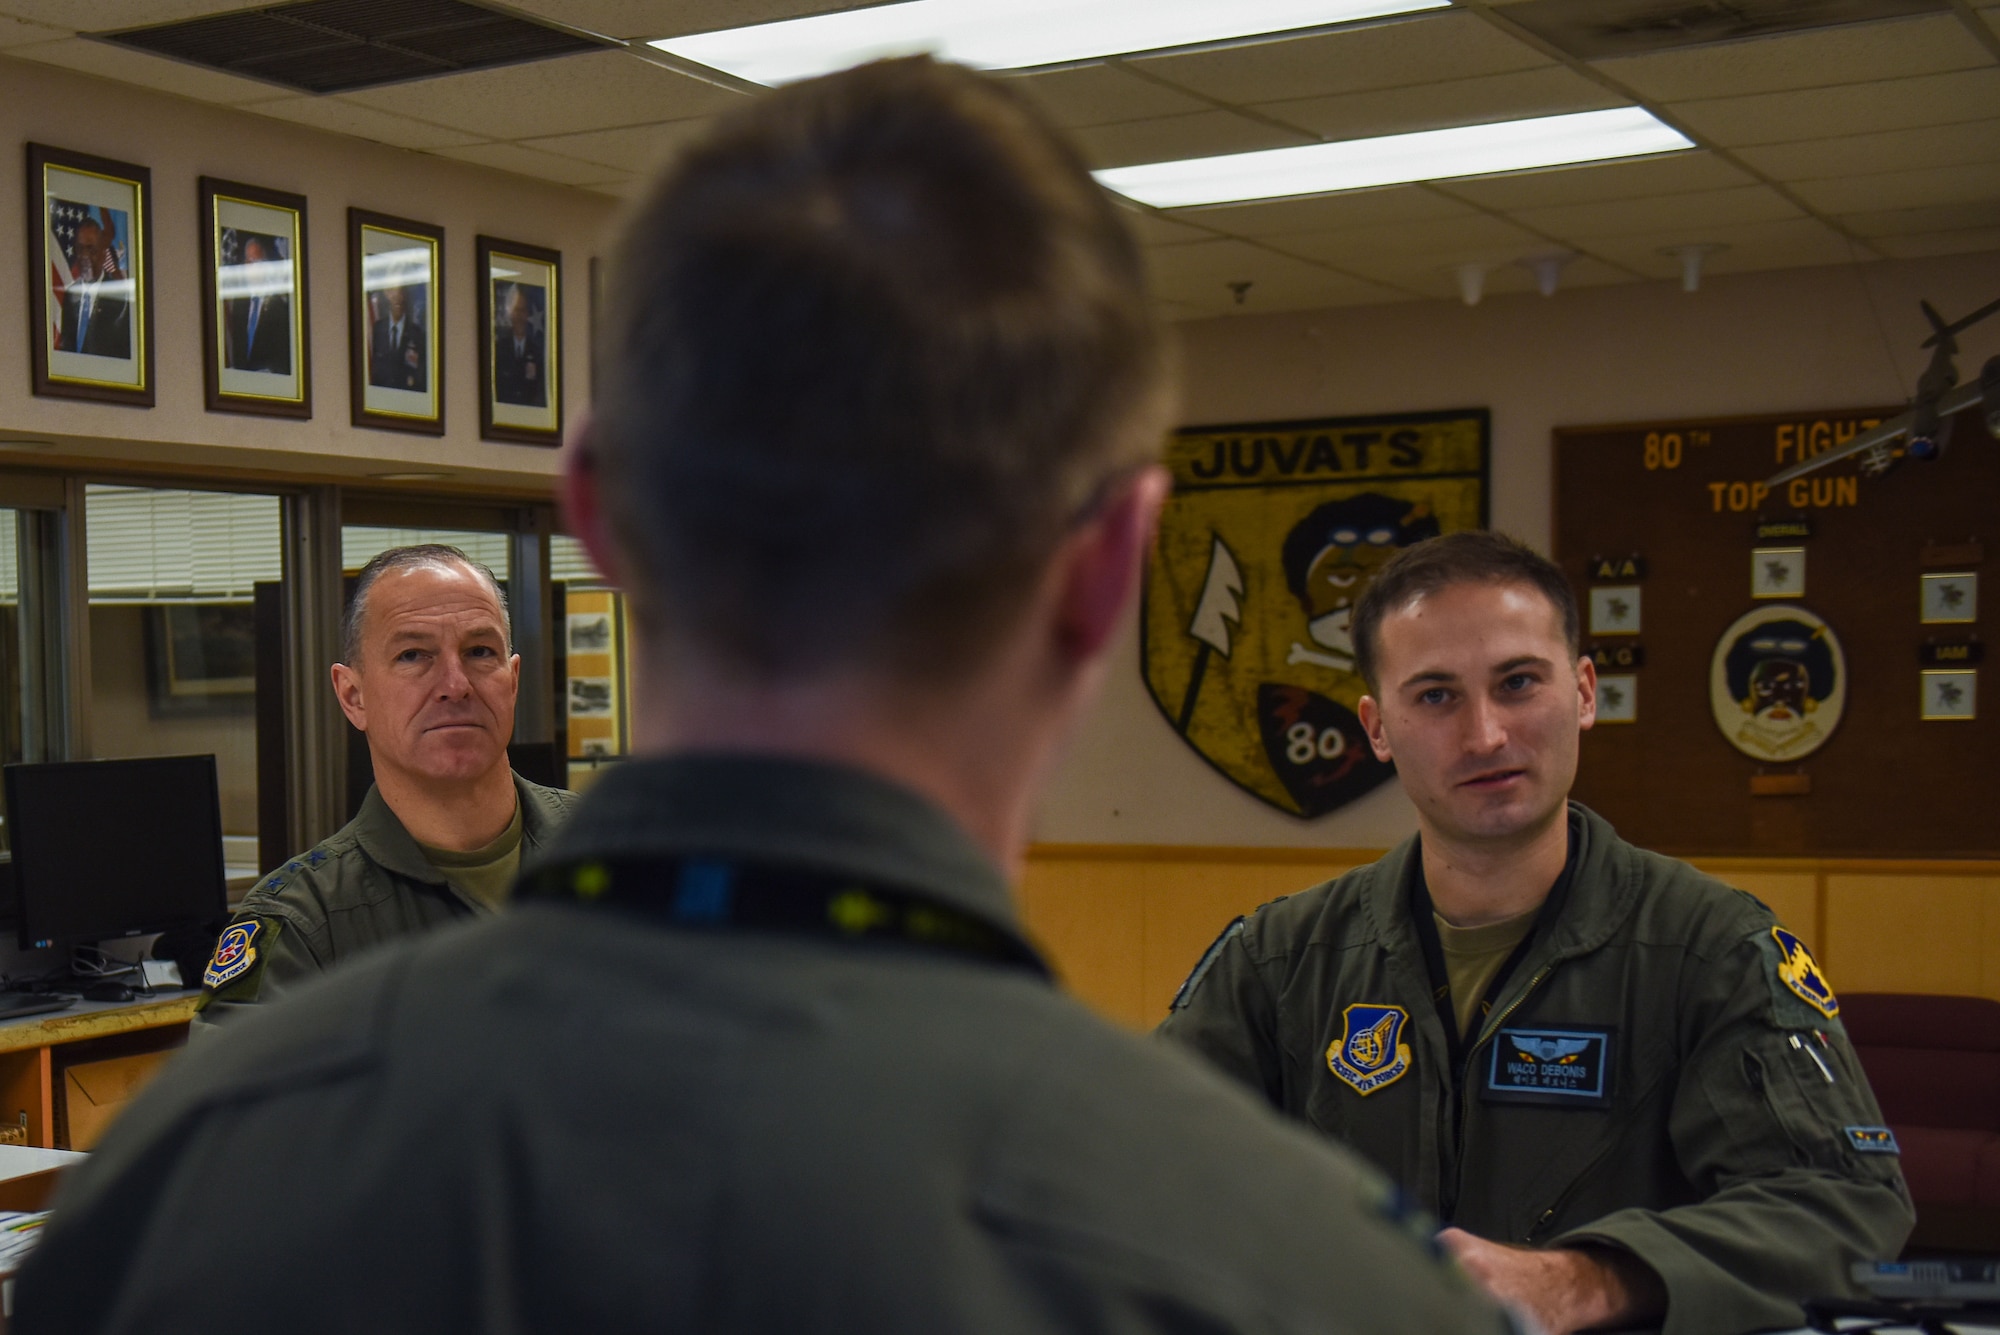 U.S. Air Force Lt. Gen. Scott “Rolls” Pleus (left), 7th Air Force commander and Capt. Nicholas “Waco” Debonis, 35th Fighter Squadron pilot (right) receives a mission brief prior to a sortie at Kunsan Air Base, Republic of Korea, Jan. 26, 2023. Gen. Pleus is a command pilot with more than 2,500 flight hours in airframes to include the F-16 Fighting Falcon. (U.S. Air Force photo by Tech. Sgt. Timothy Dischinat)